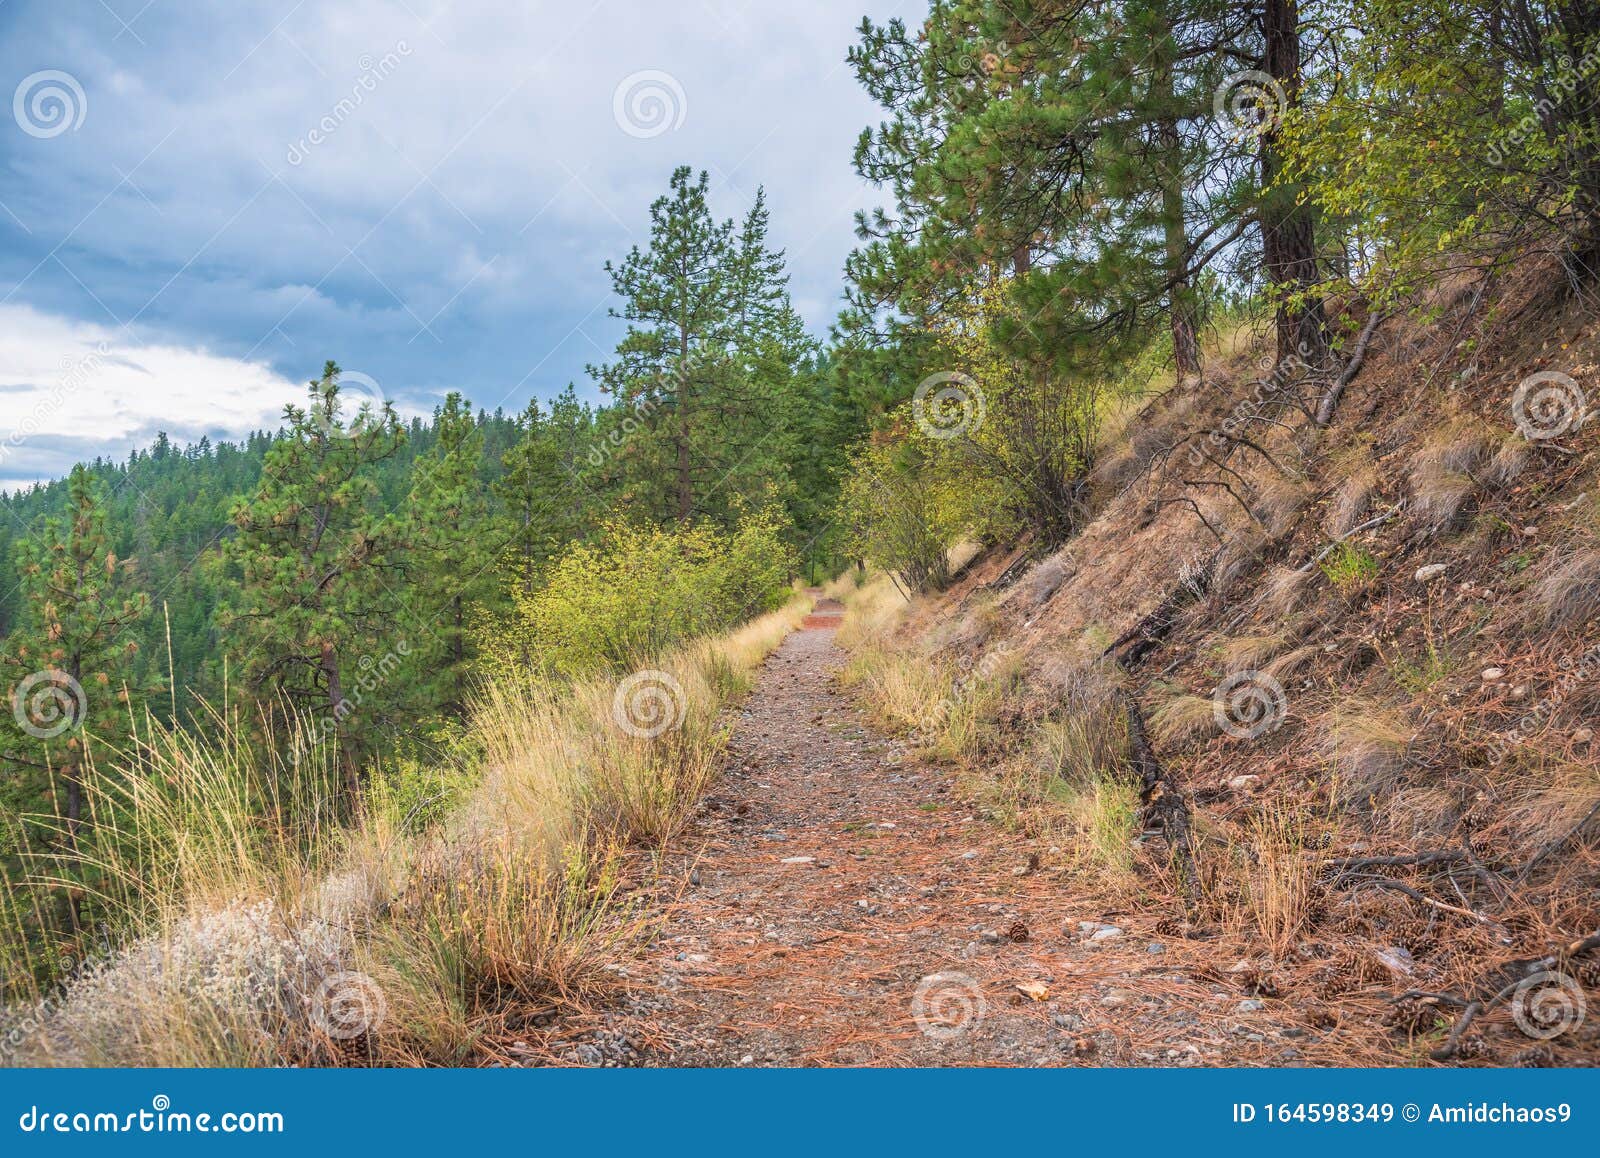 High Elevation Trail On Side Of Mountain, Through Pine ...